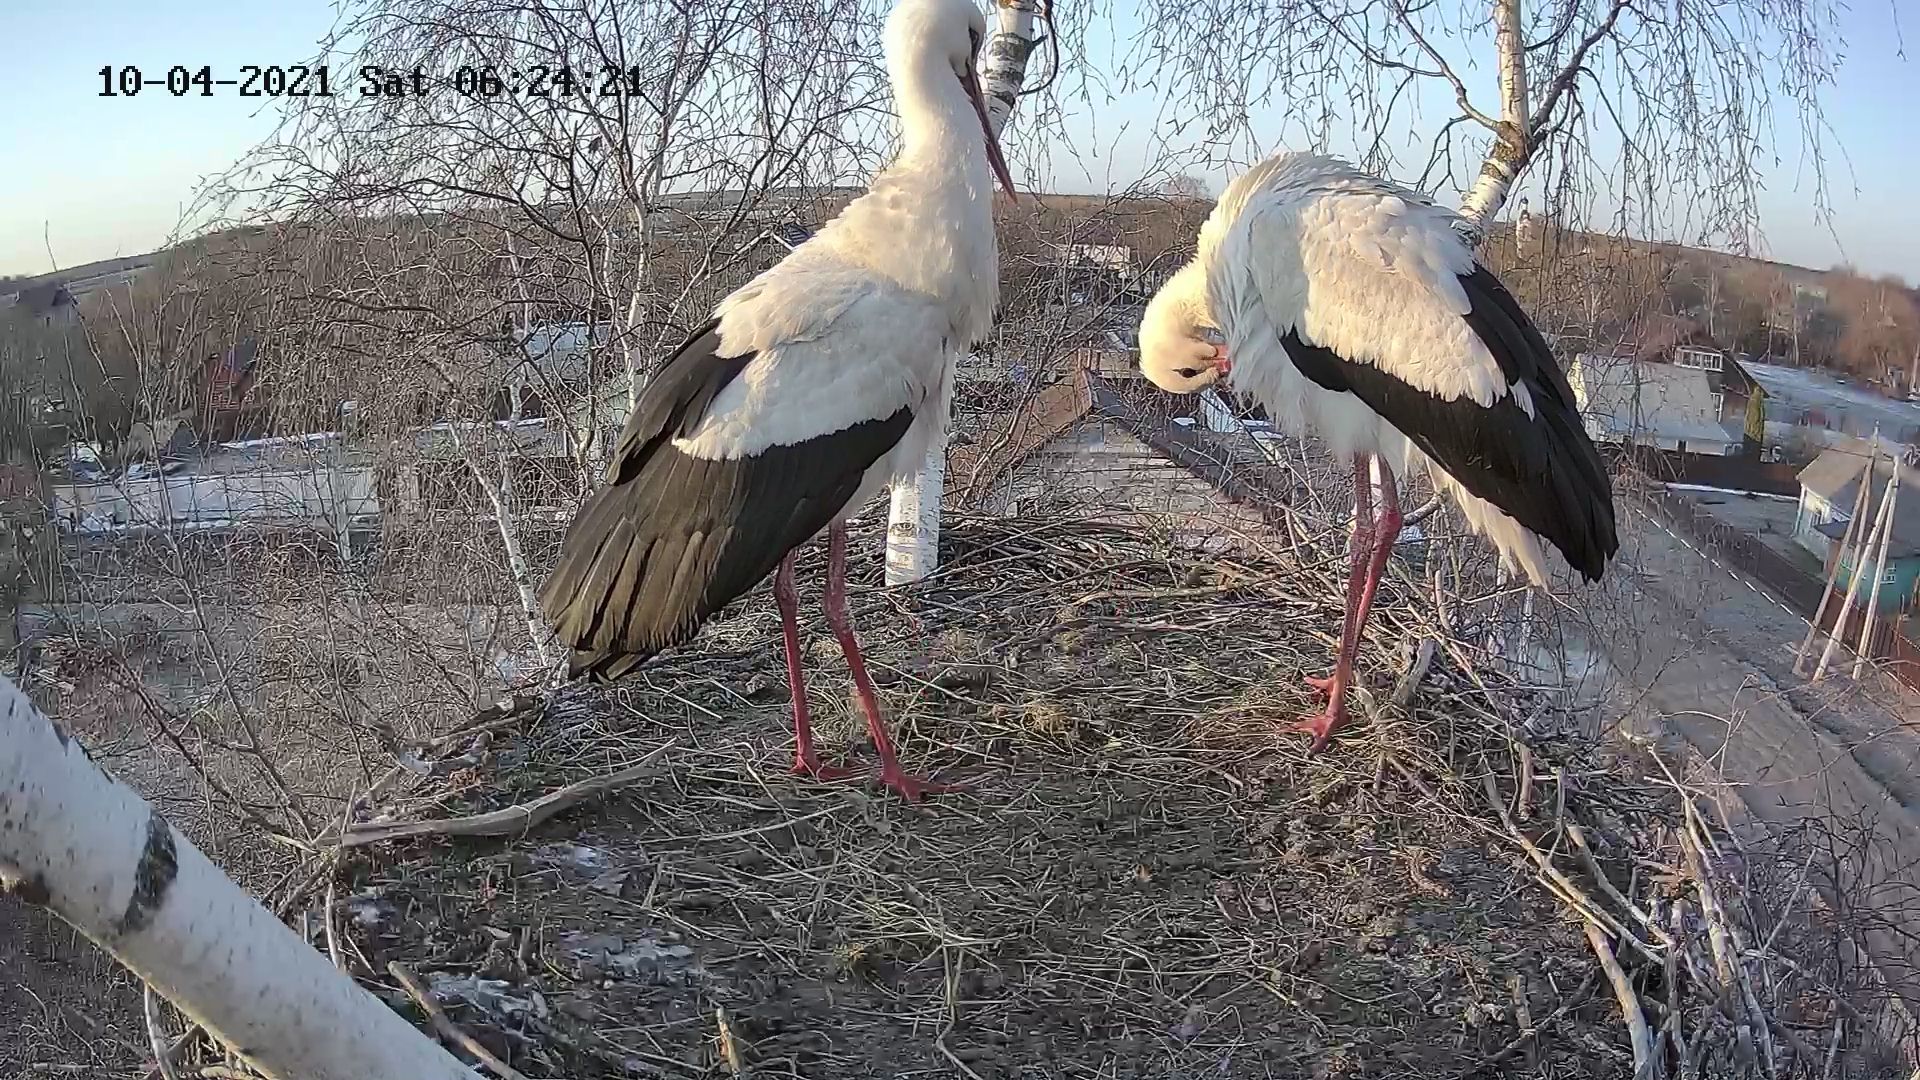 Live broadcast from the storks' nest - My, Video monitoring, Birds, Bird watching, White stork, Stork, Nature, Video